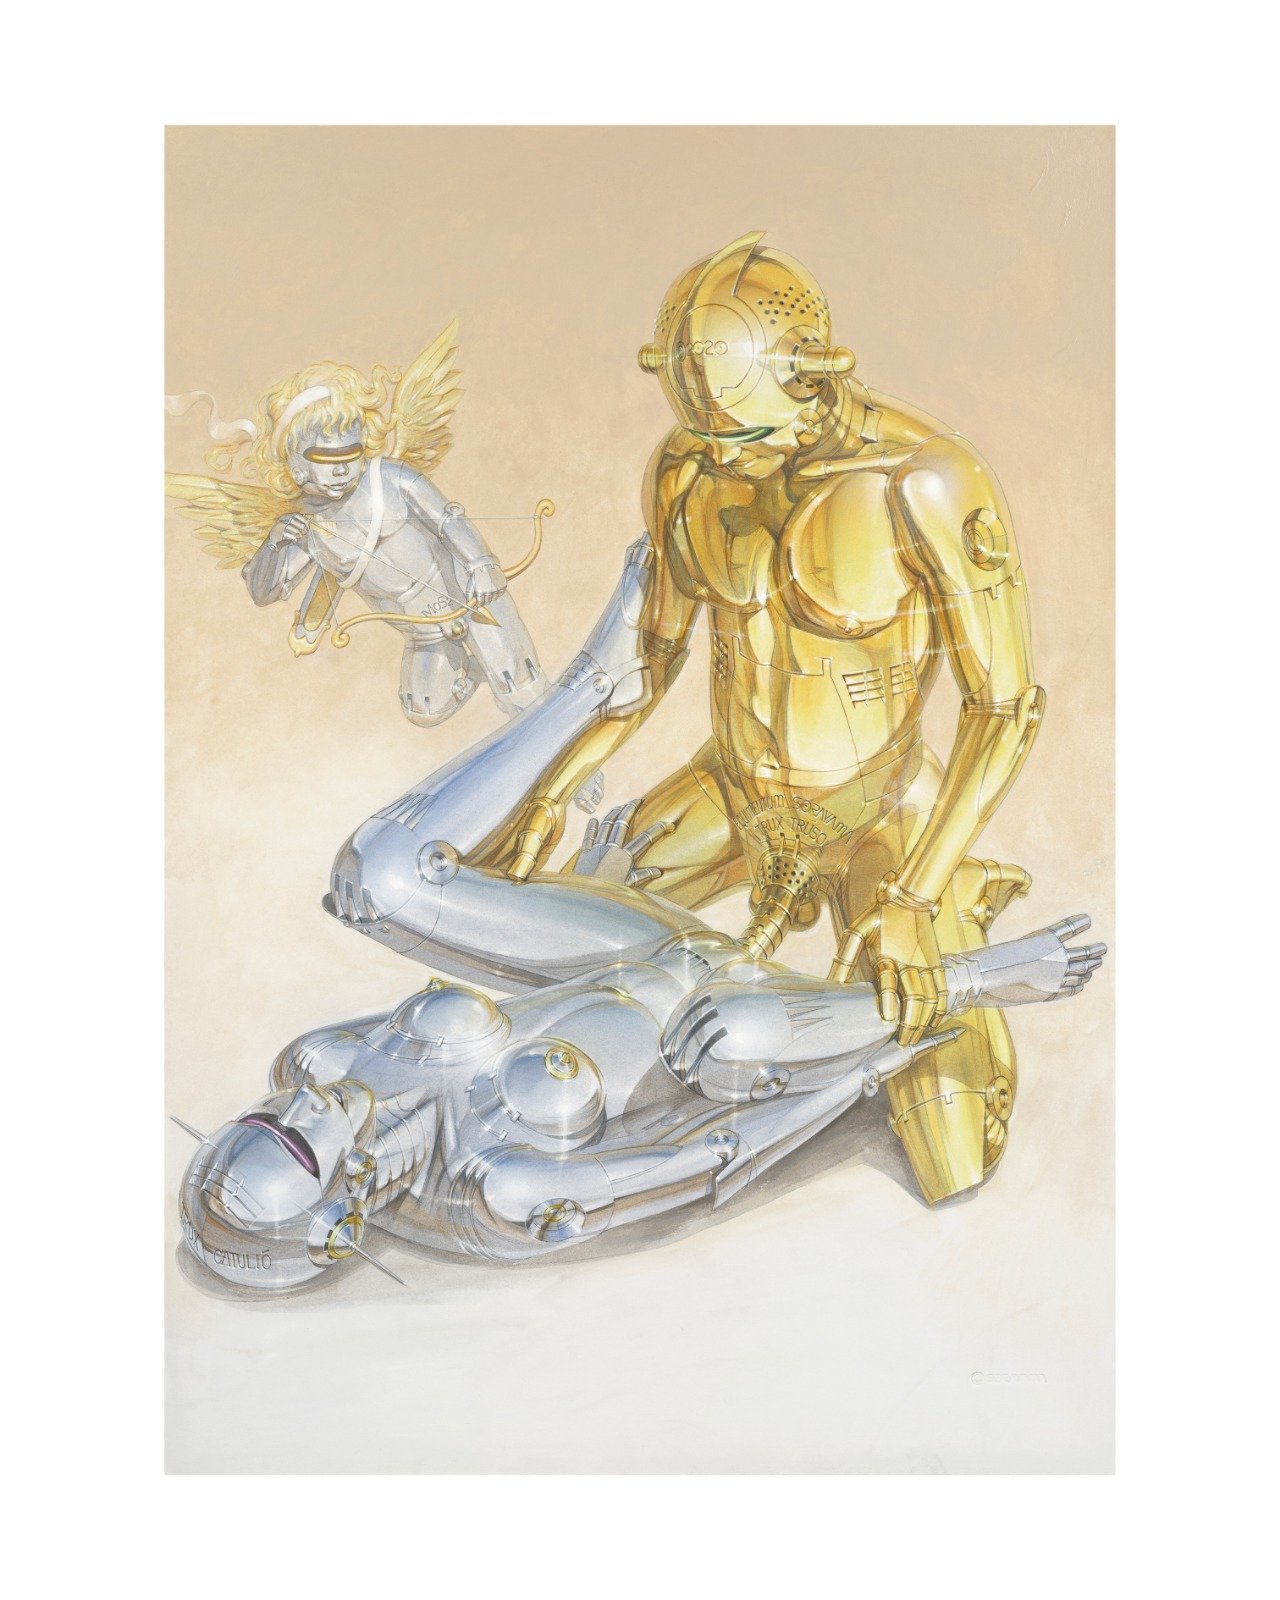 Image of EXIT ISSUE 40 SPRING SUMMER 2020 HAJIMI SORAYAMA ***SOLD OUT***